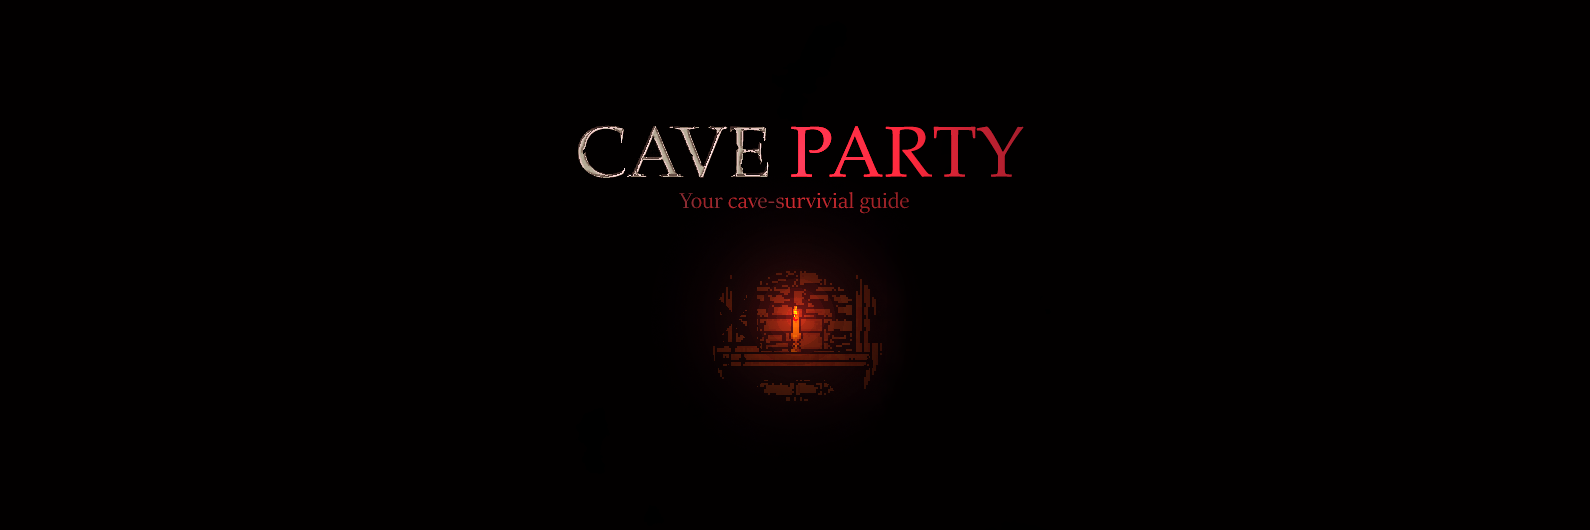 Cave Party poster